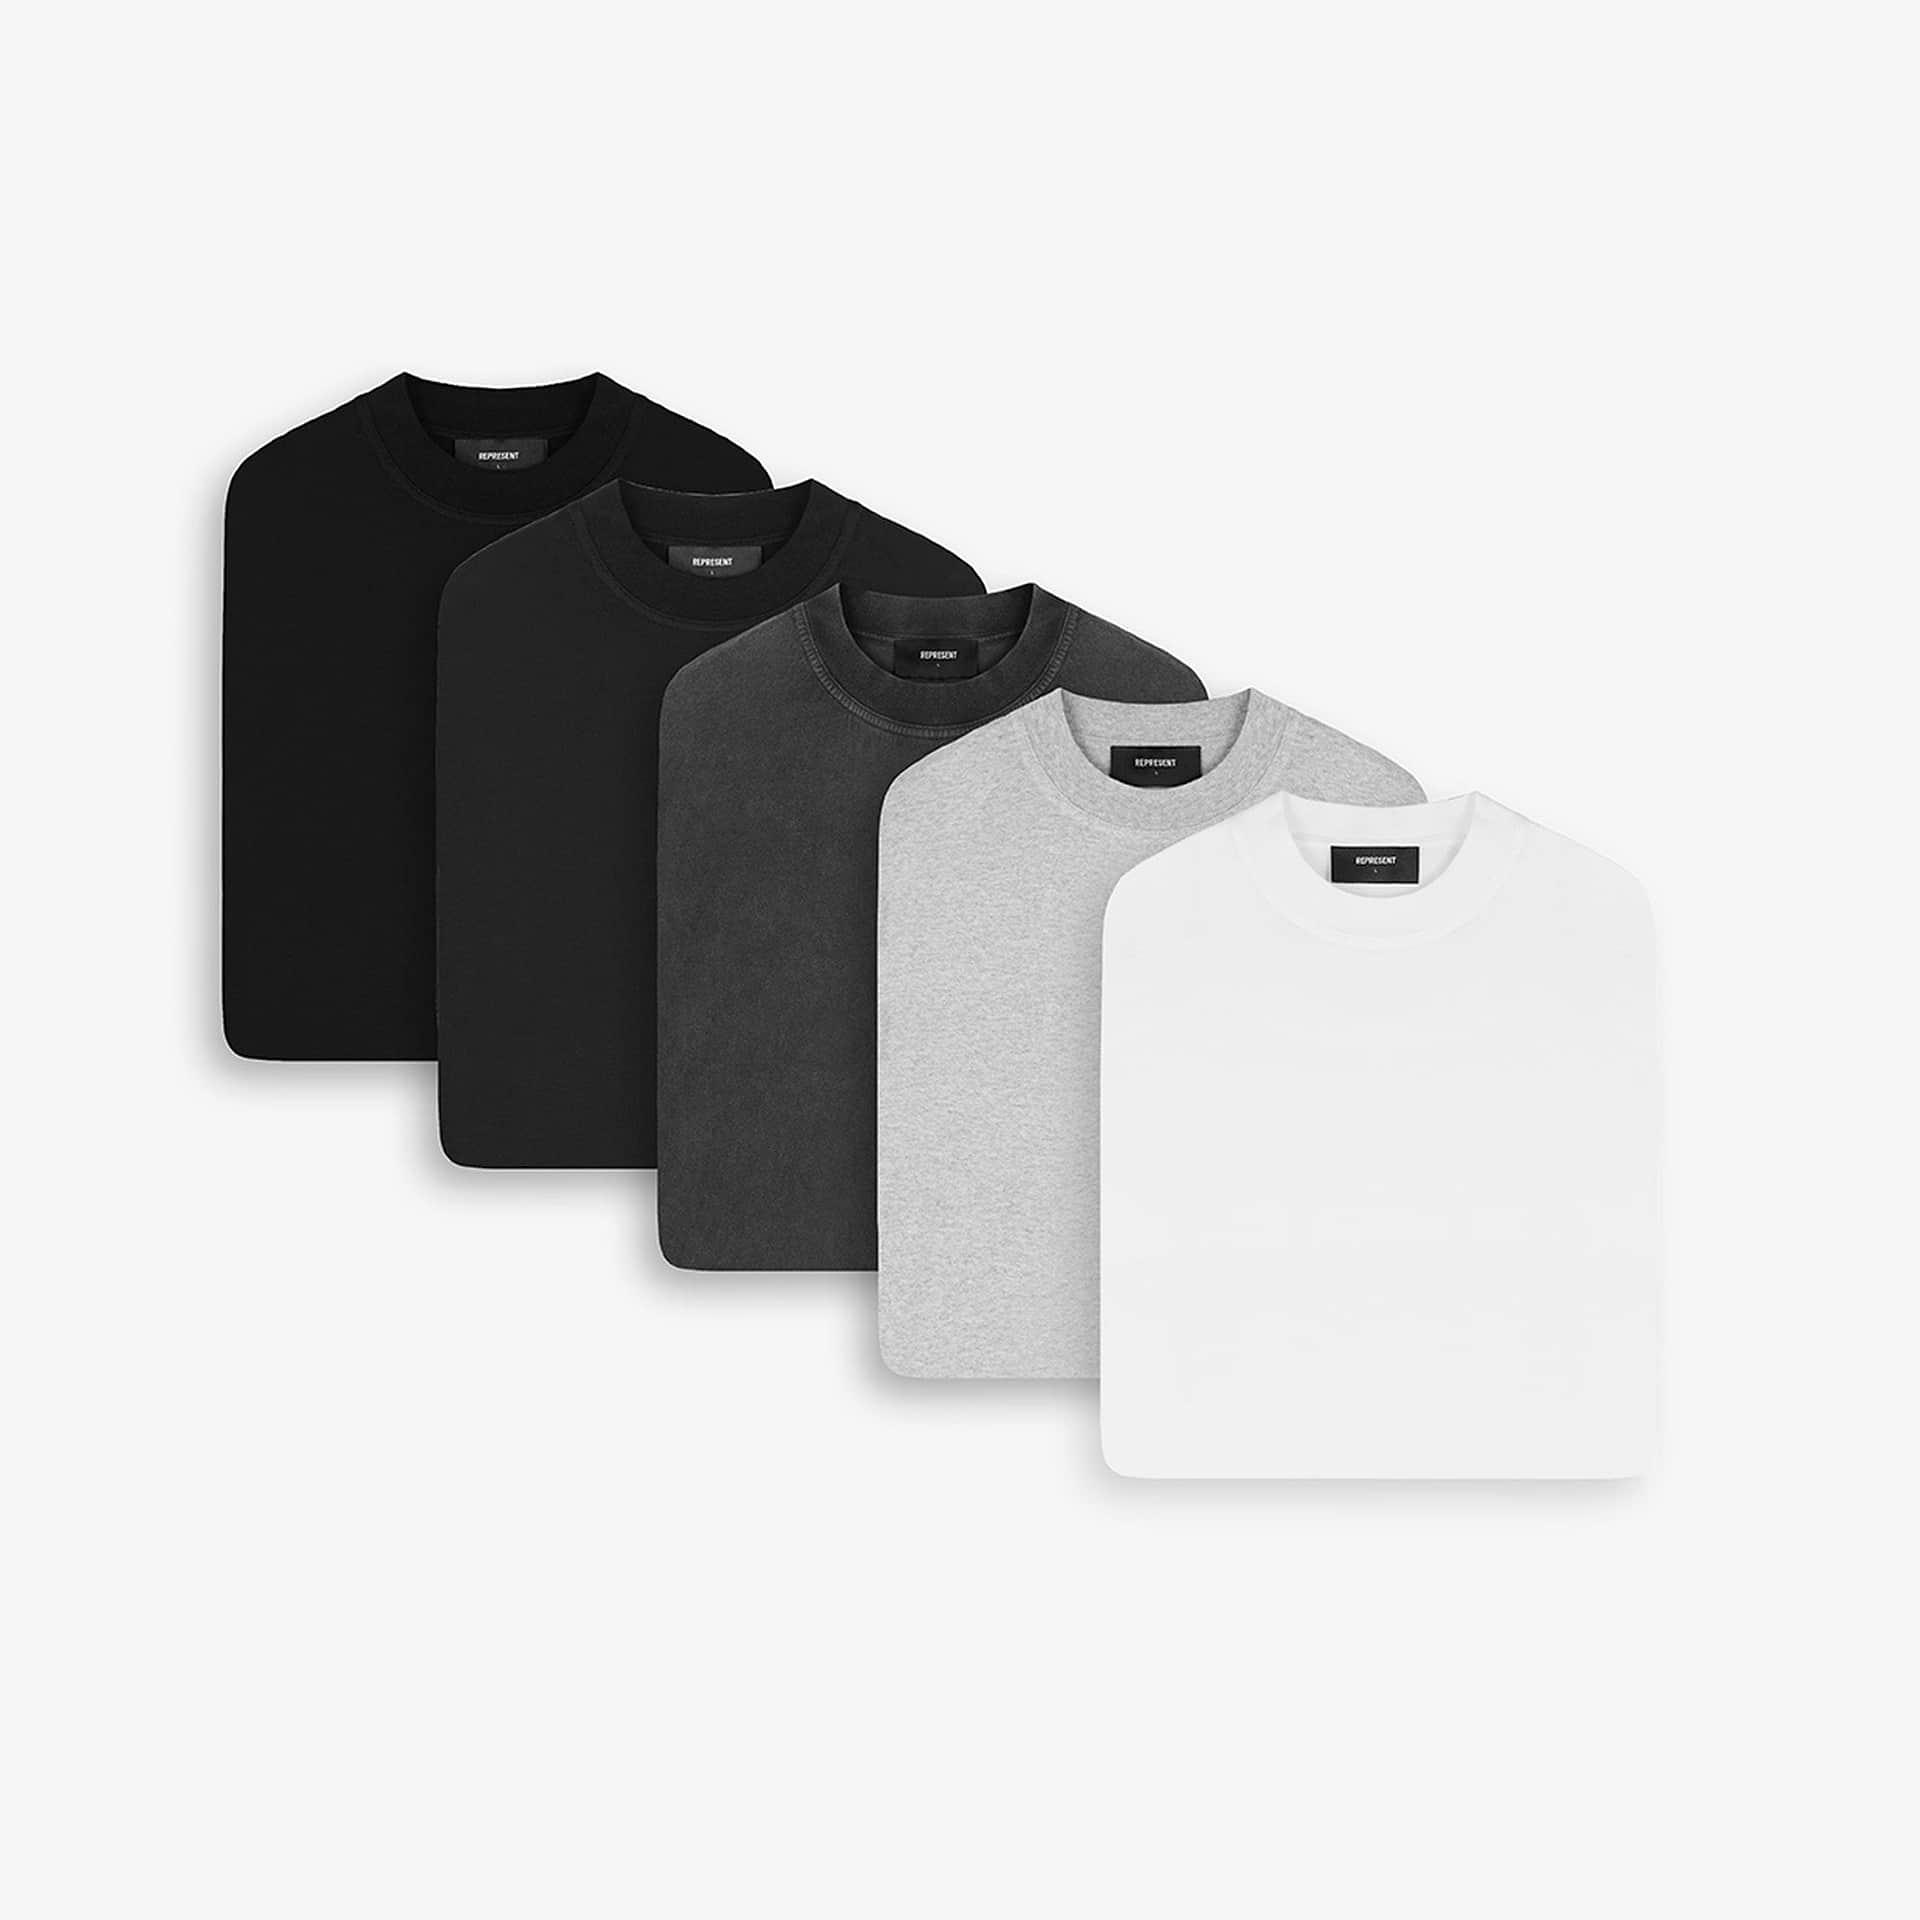 The Core T-Shirt - Mixed 5 Pack